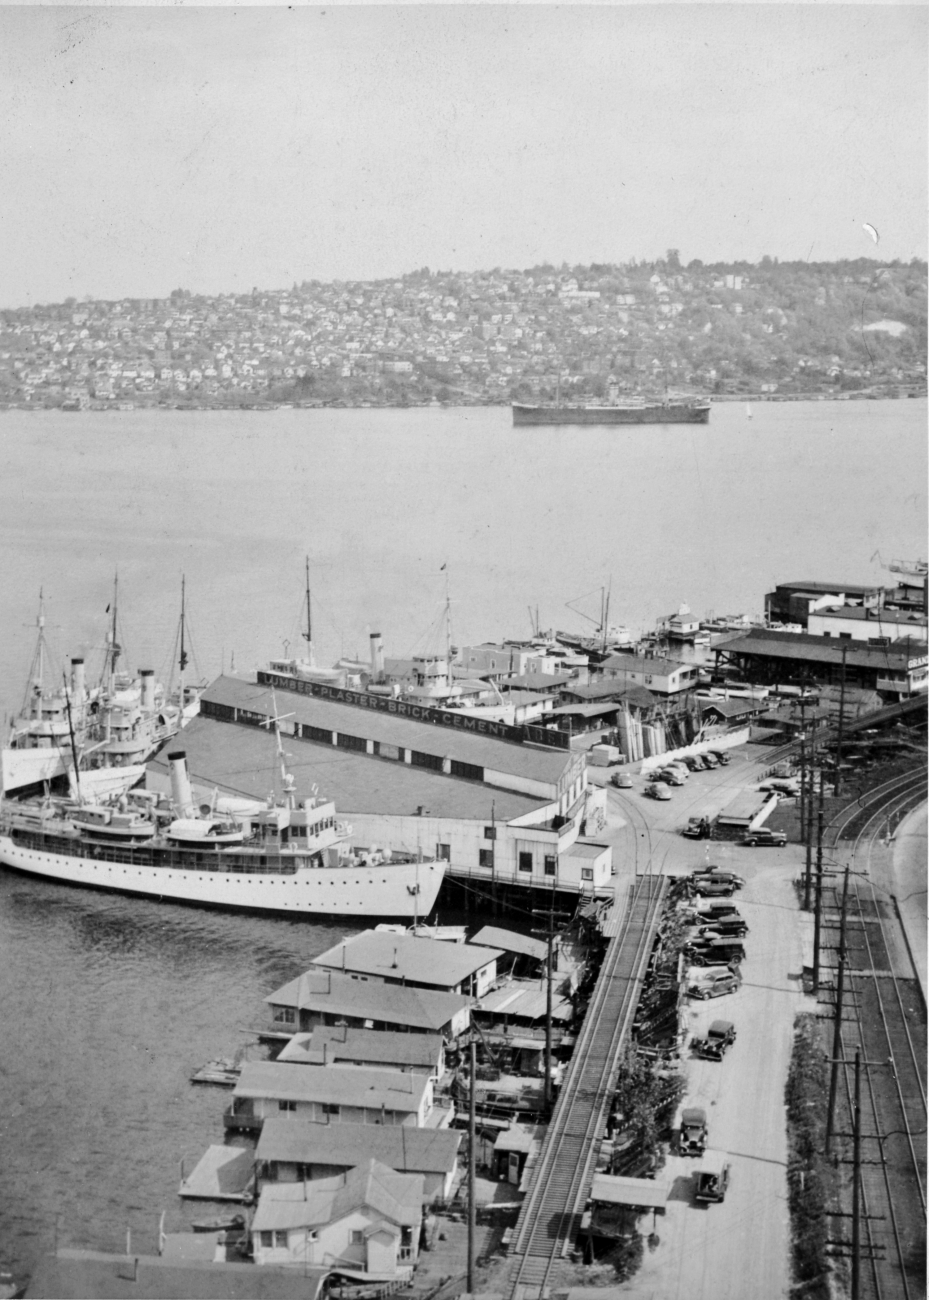 Coast and Geodetic Survey Ships SURVEYOR, GUIDE, DISCOVERER,and PIONEER tied up at the Abel Lumber company warehouse piers